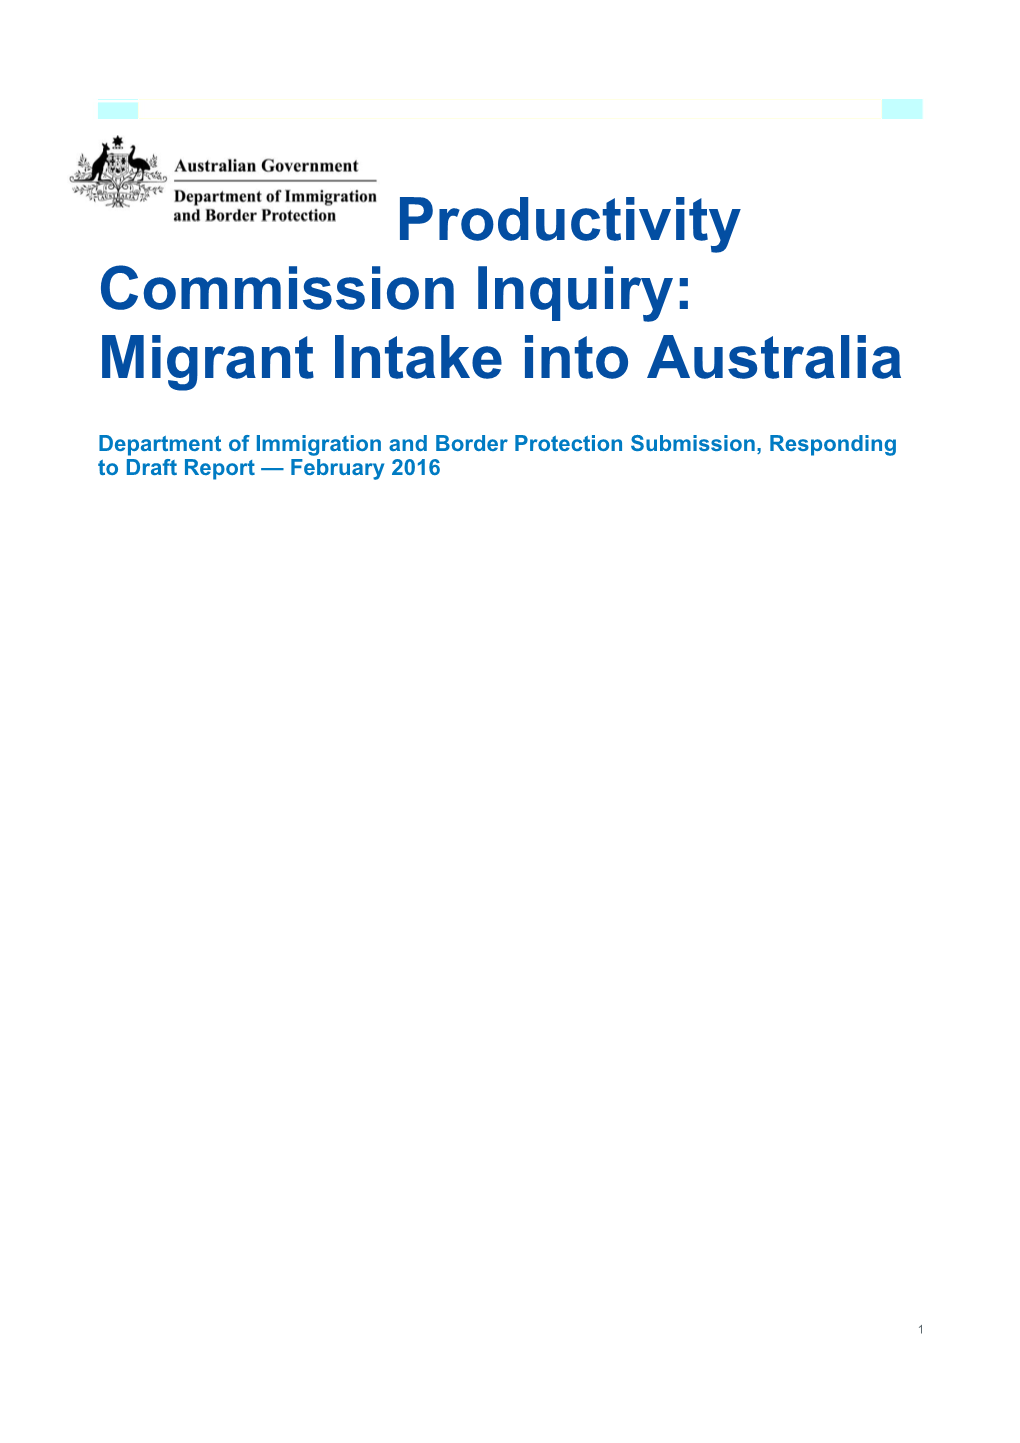 Submission DR138 - Department of Immigration and Border Protection - Migrant Intake Into